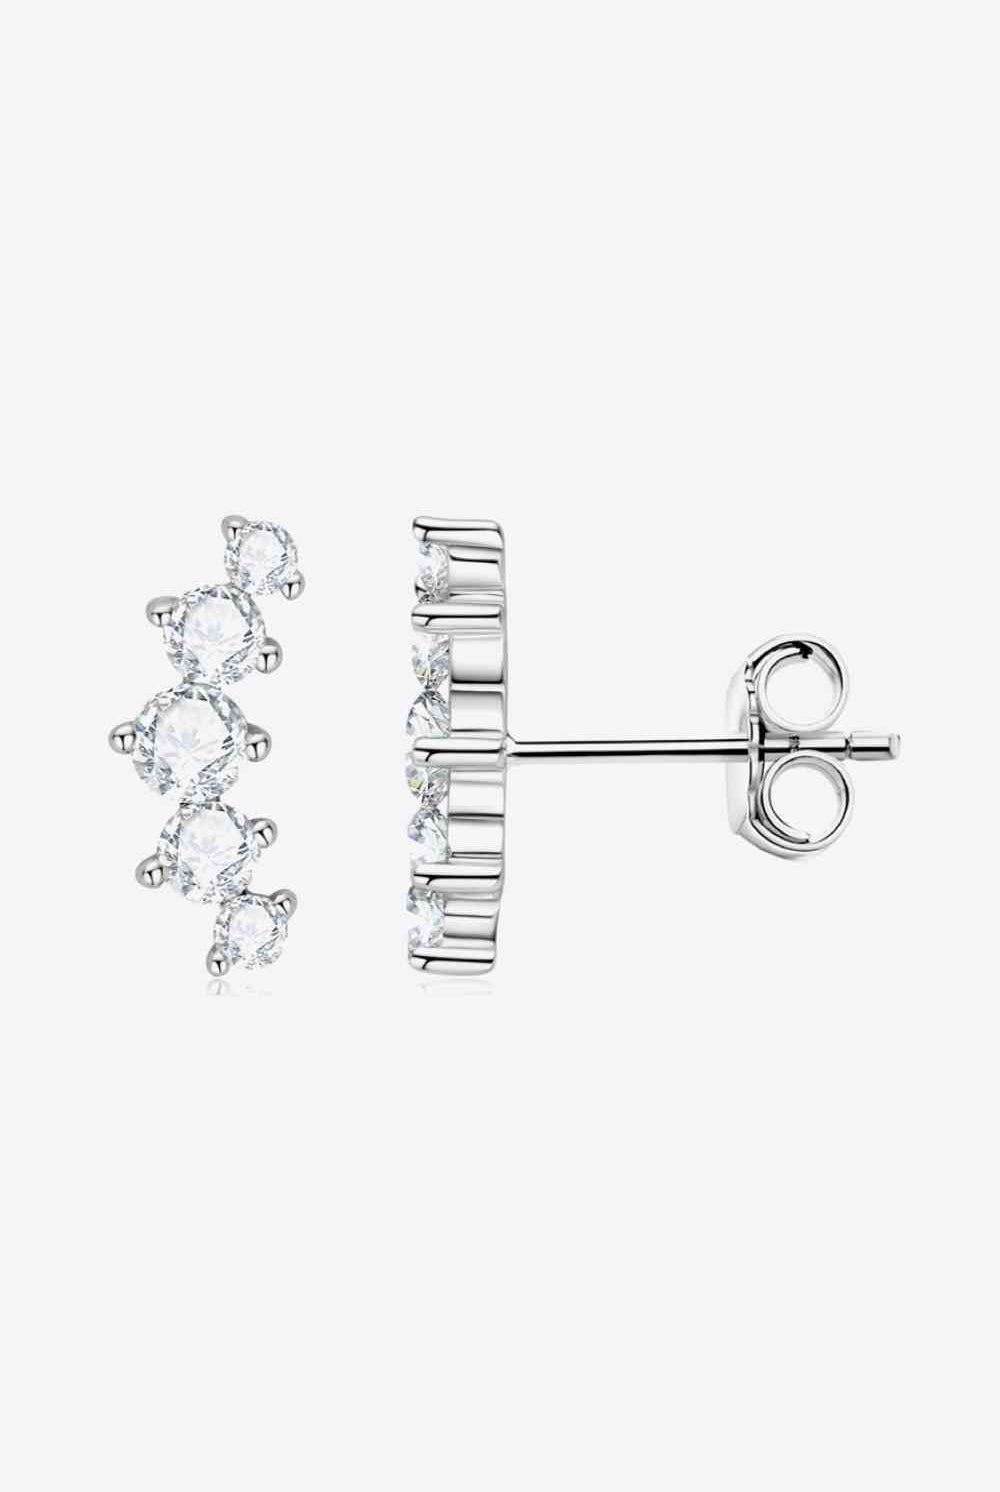 All You Need Moissanite Platinum-Plated Earrings-Earrings-Trendsi-Urban Threadz Boutique, Women's Fashion Boutique in Saugatuck, MI